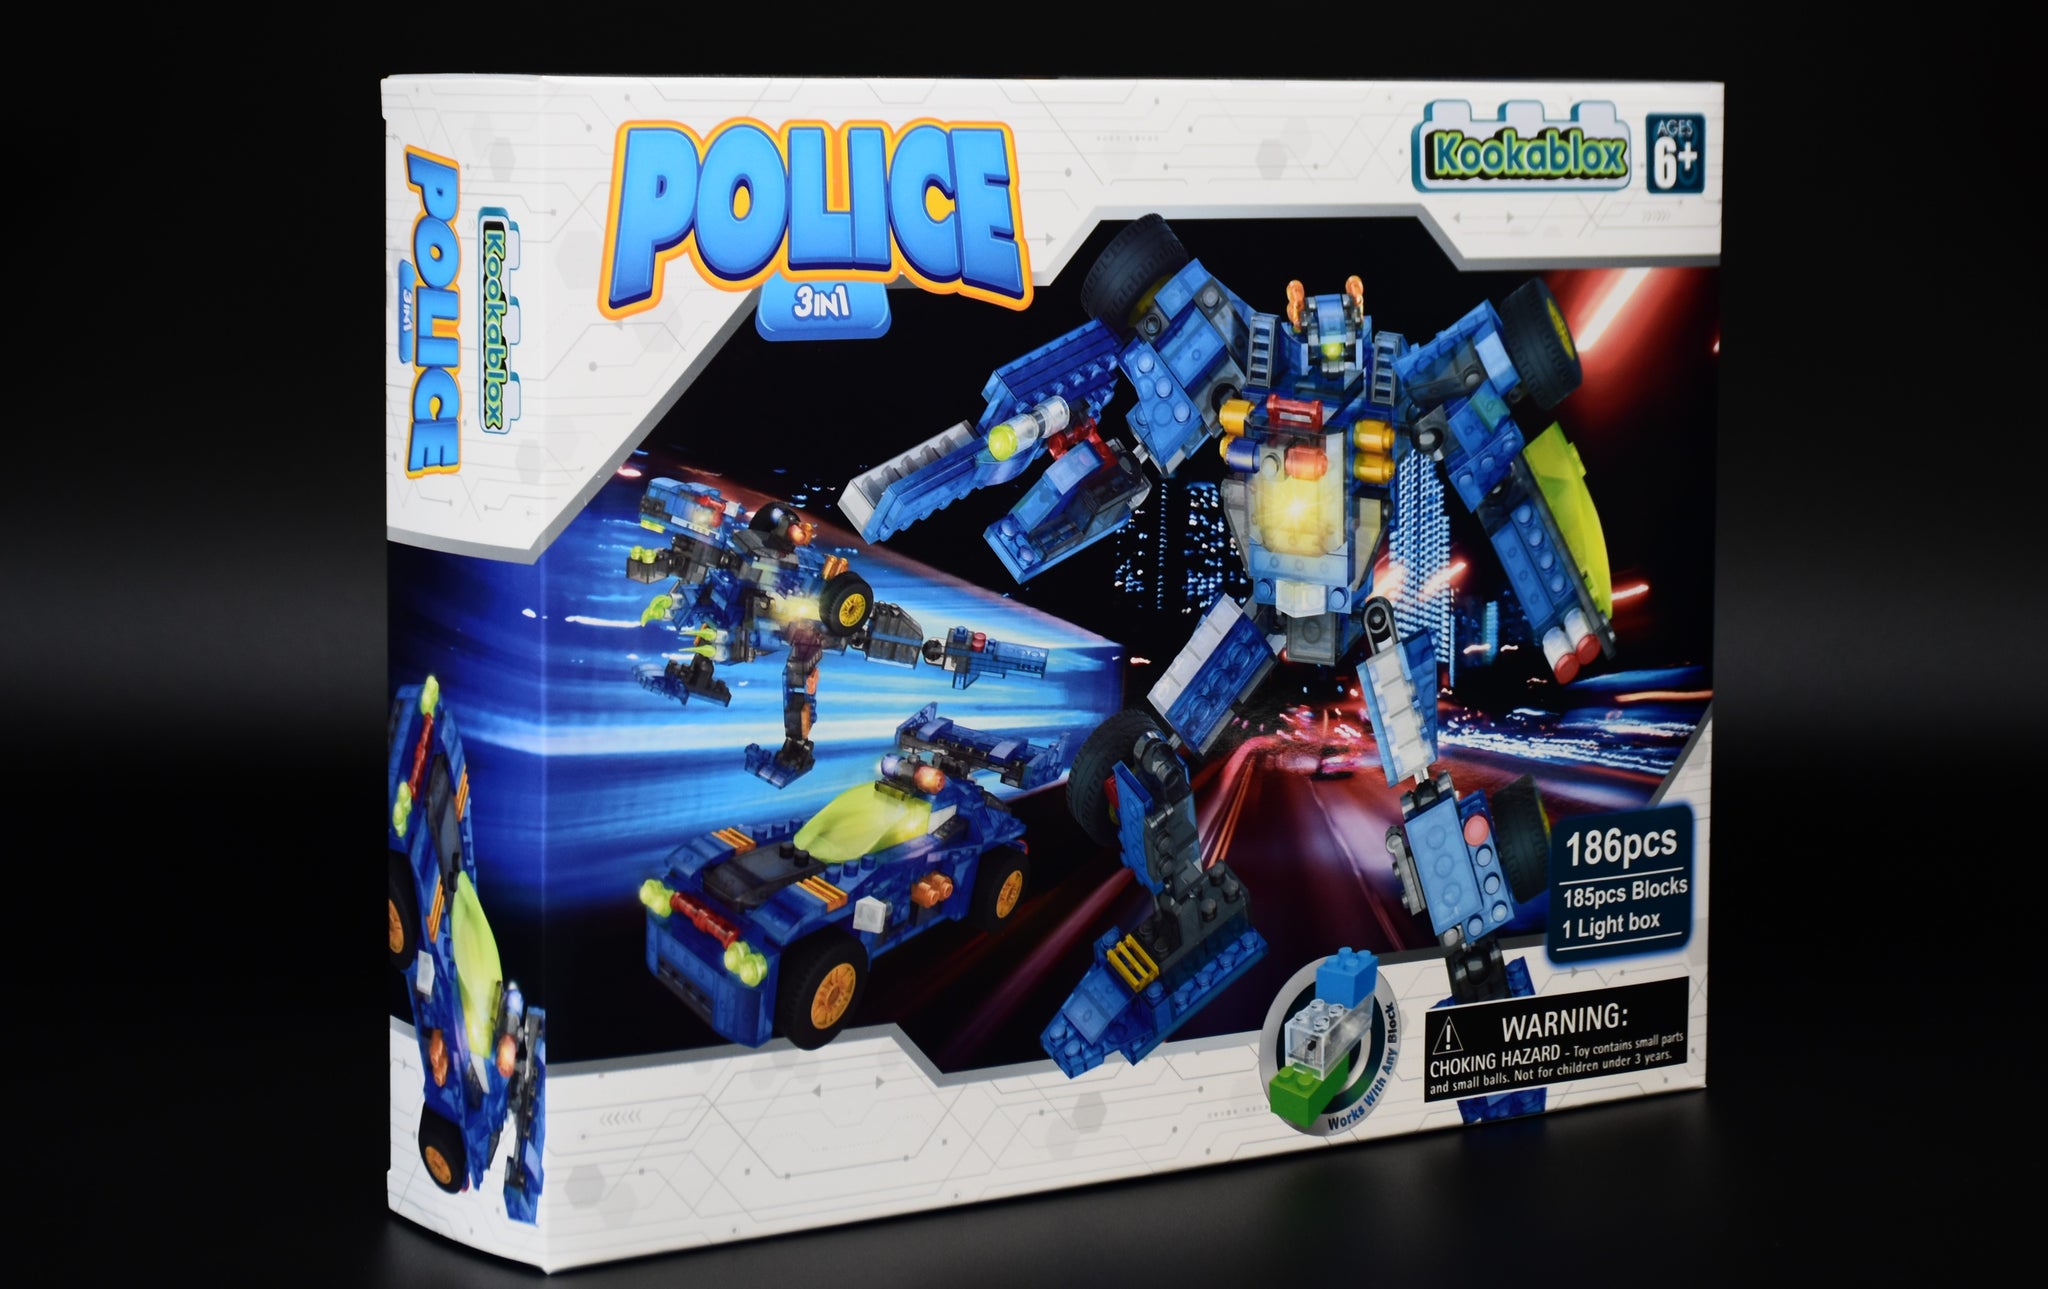 3-in-1 Police Robot Building Block Kit with Cool LED Light Boxes. Transformable Robot, Car, & Dinosaur. (Compatible with other bricks, 186 pieces)